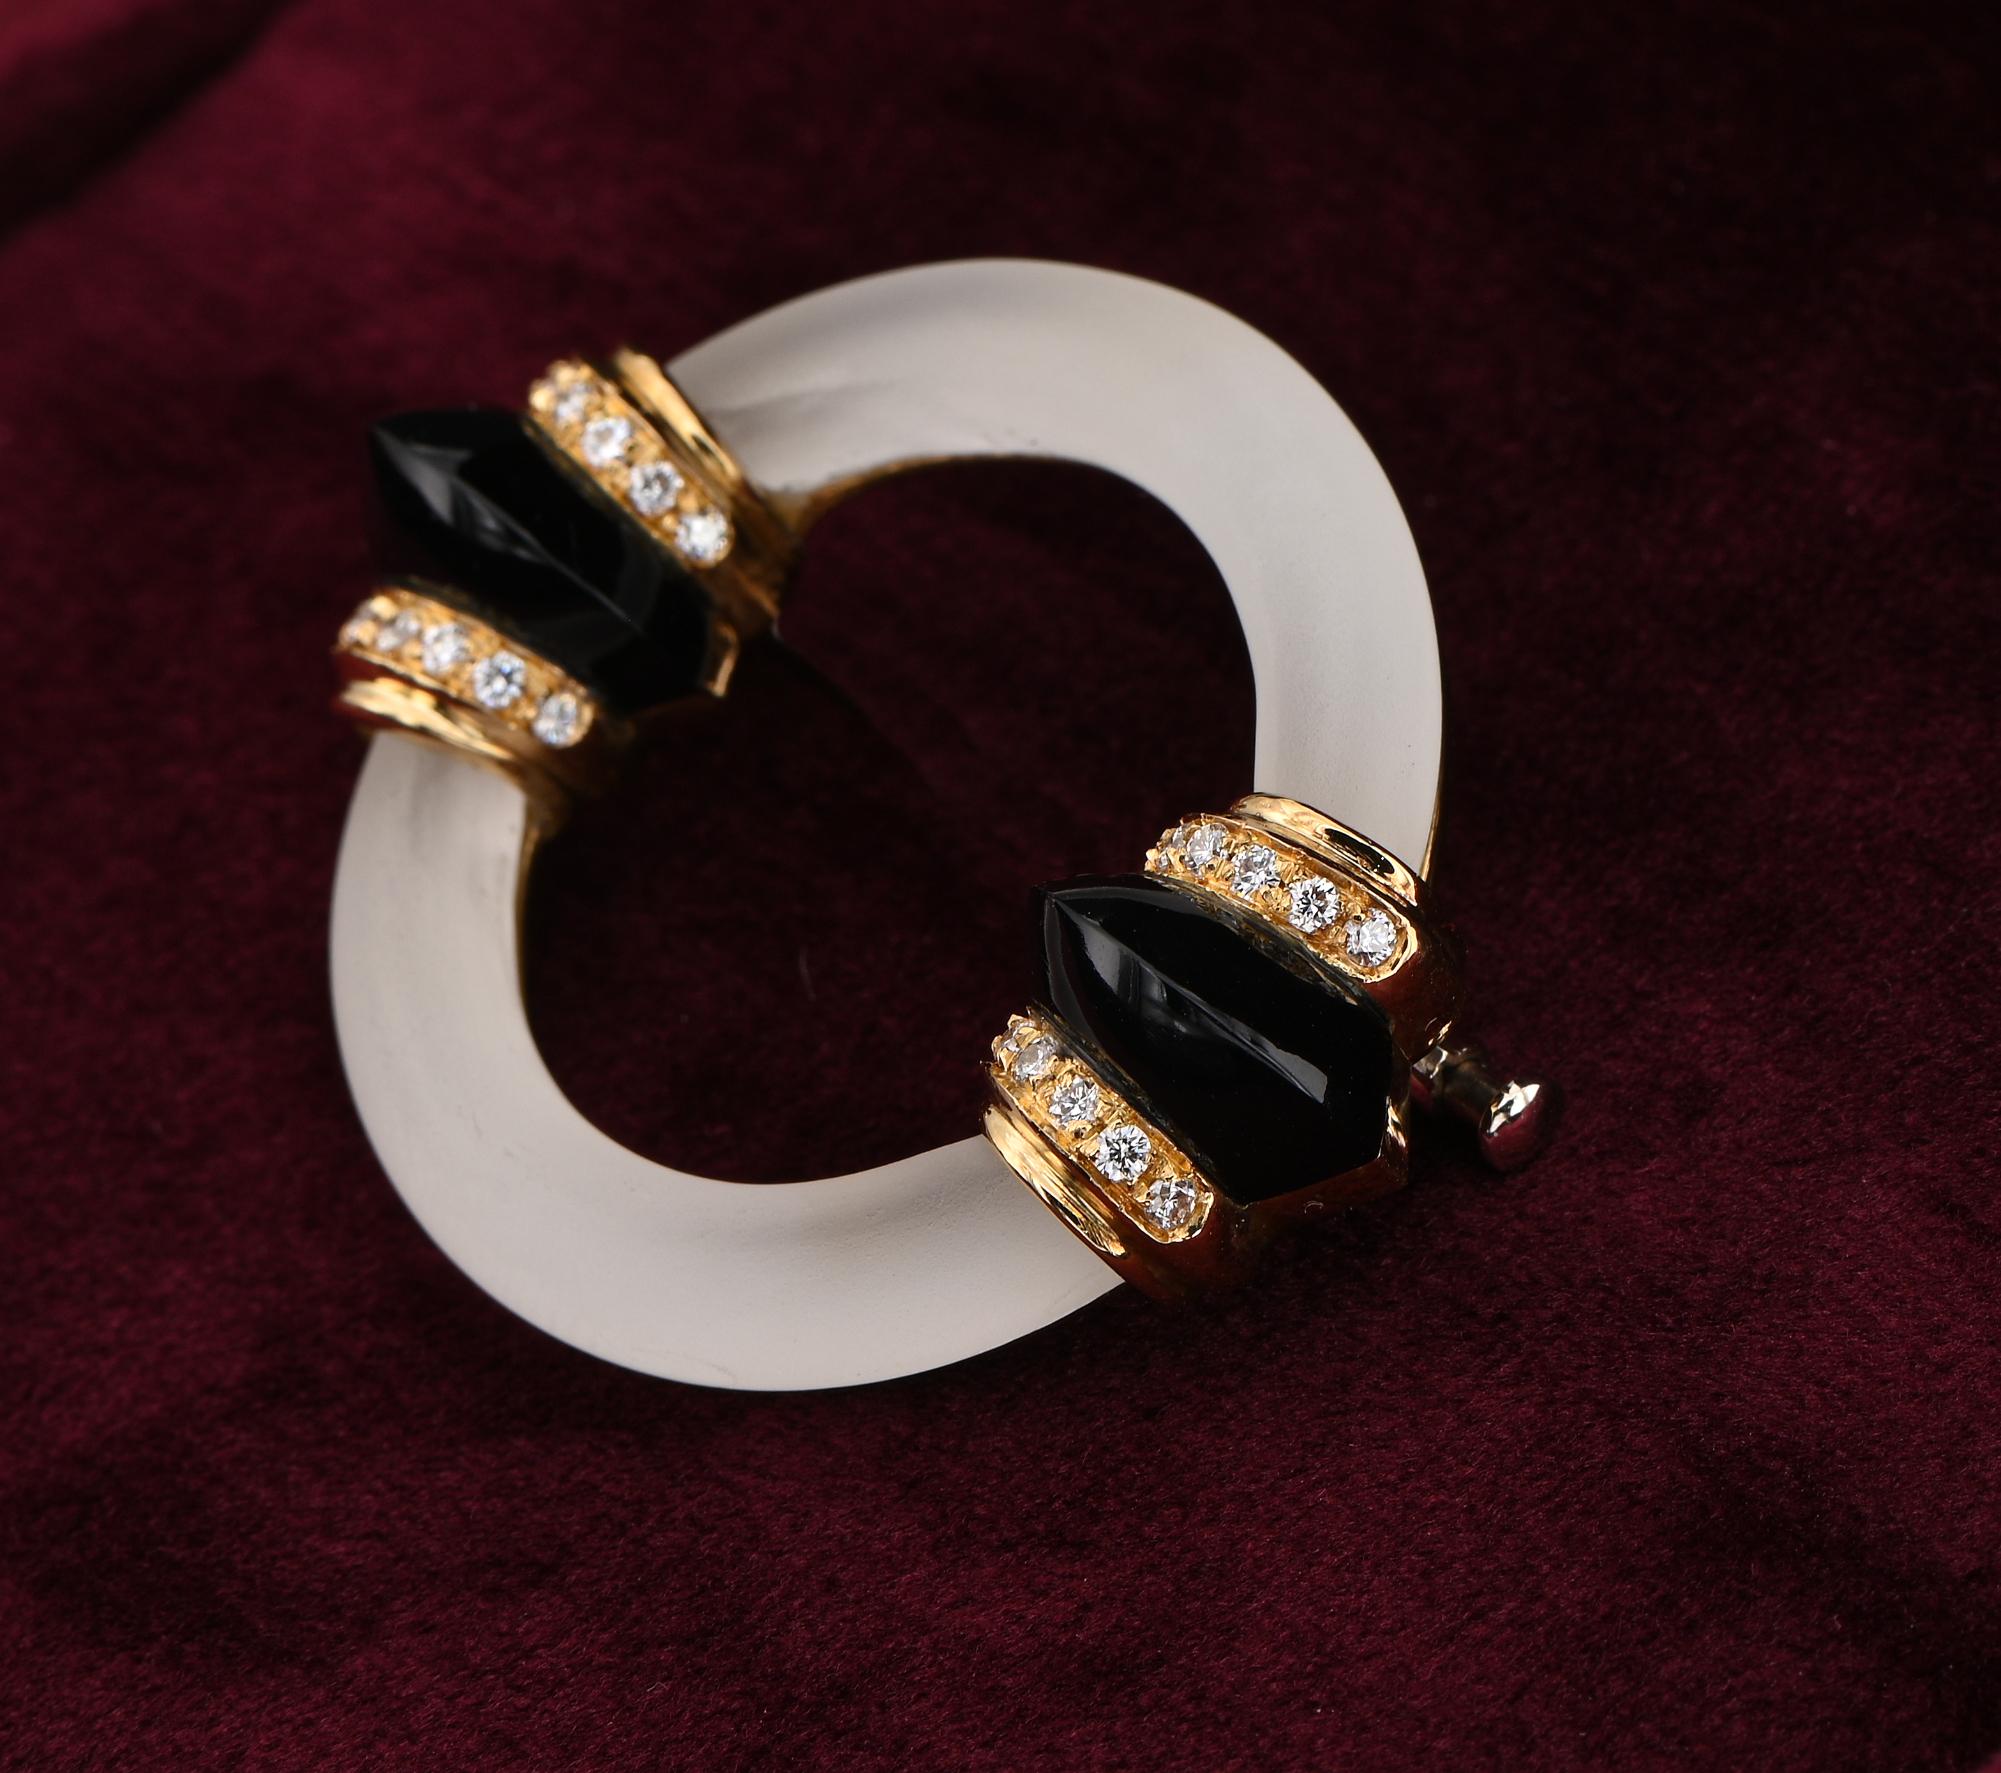 Rock Crystal Black Onyx Diamond Brooch 18 KT In Good Condition For Sale In Napoli, IT